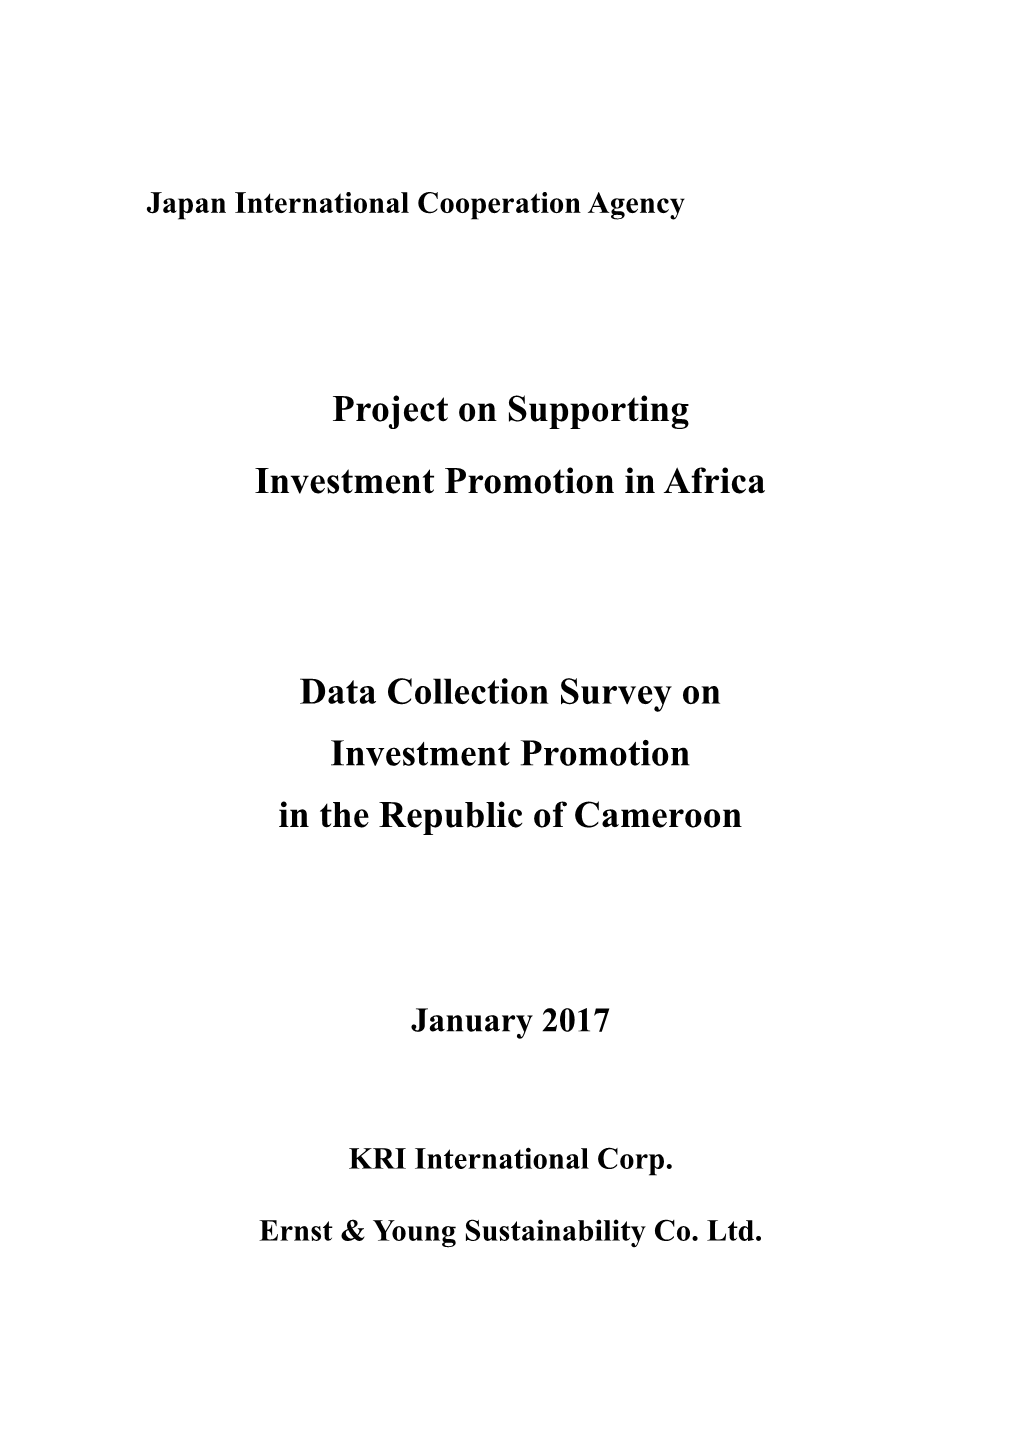 Data Collection Survey on Investment Promotion in the Republic of Cameroon